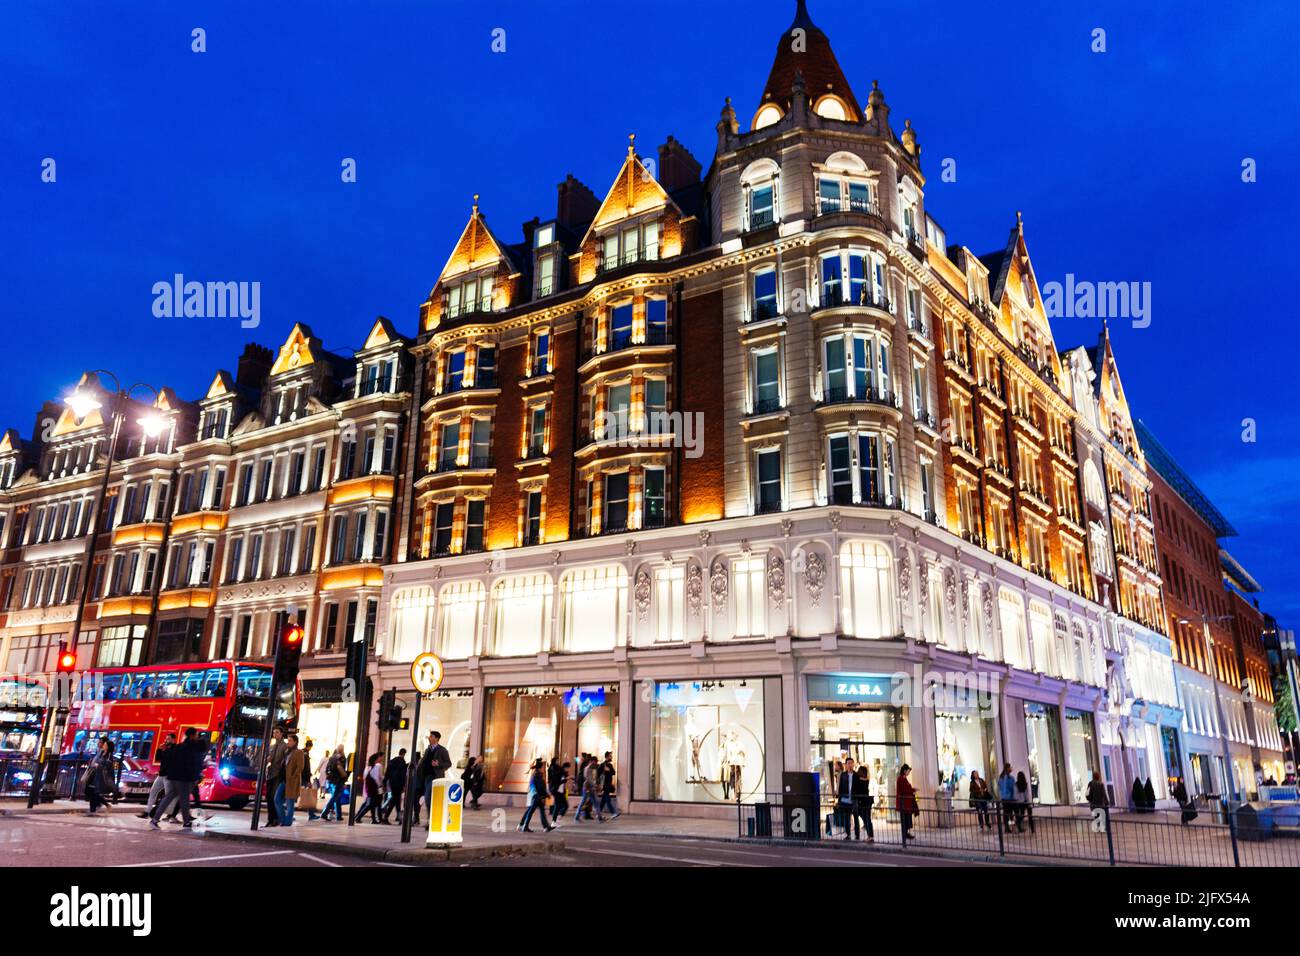 Zara store. ZARA is a Spanish apparel retailer specializes in fast fashion. Knightsbridge. Westminster and Royal Borough of Kensington and Chelsea. Lo Stock Photo